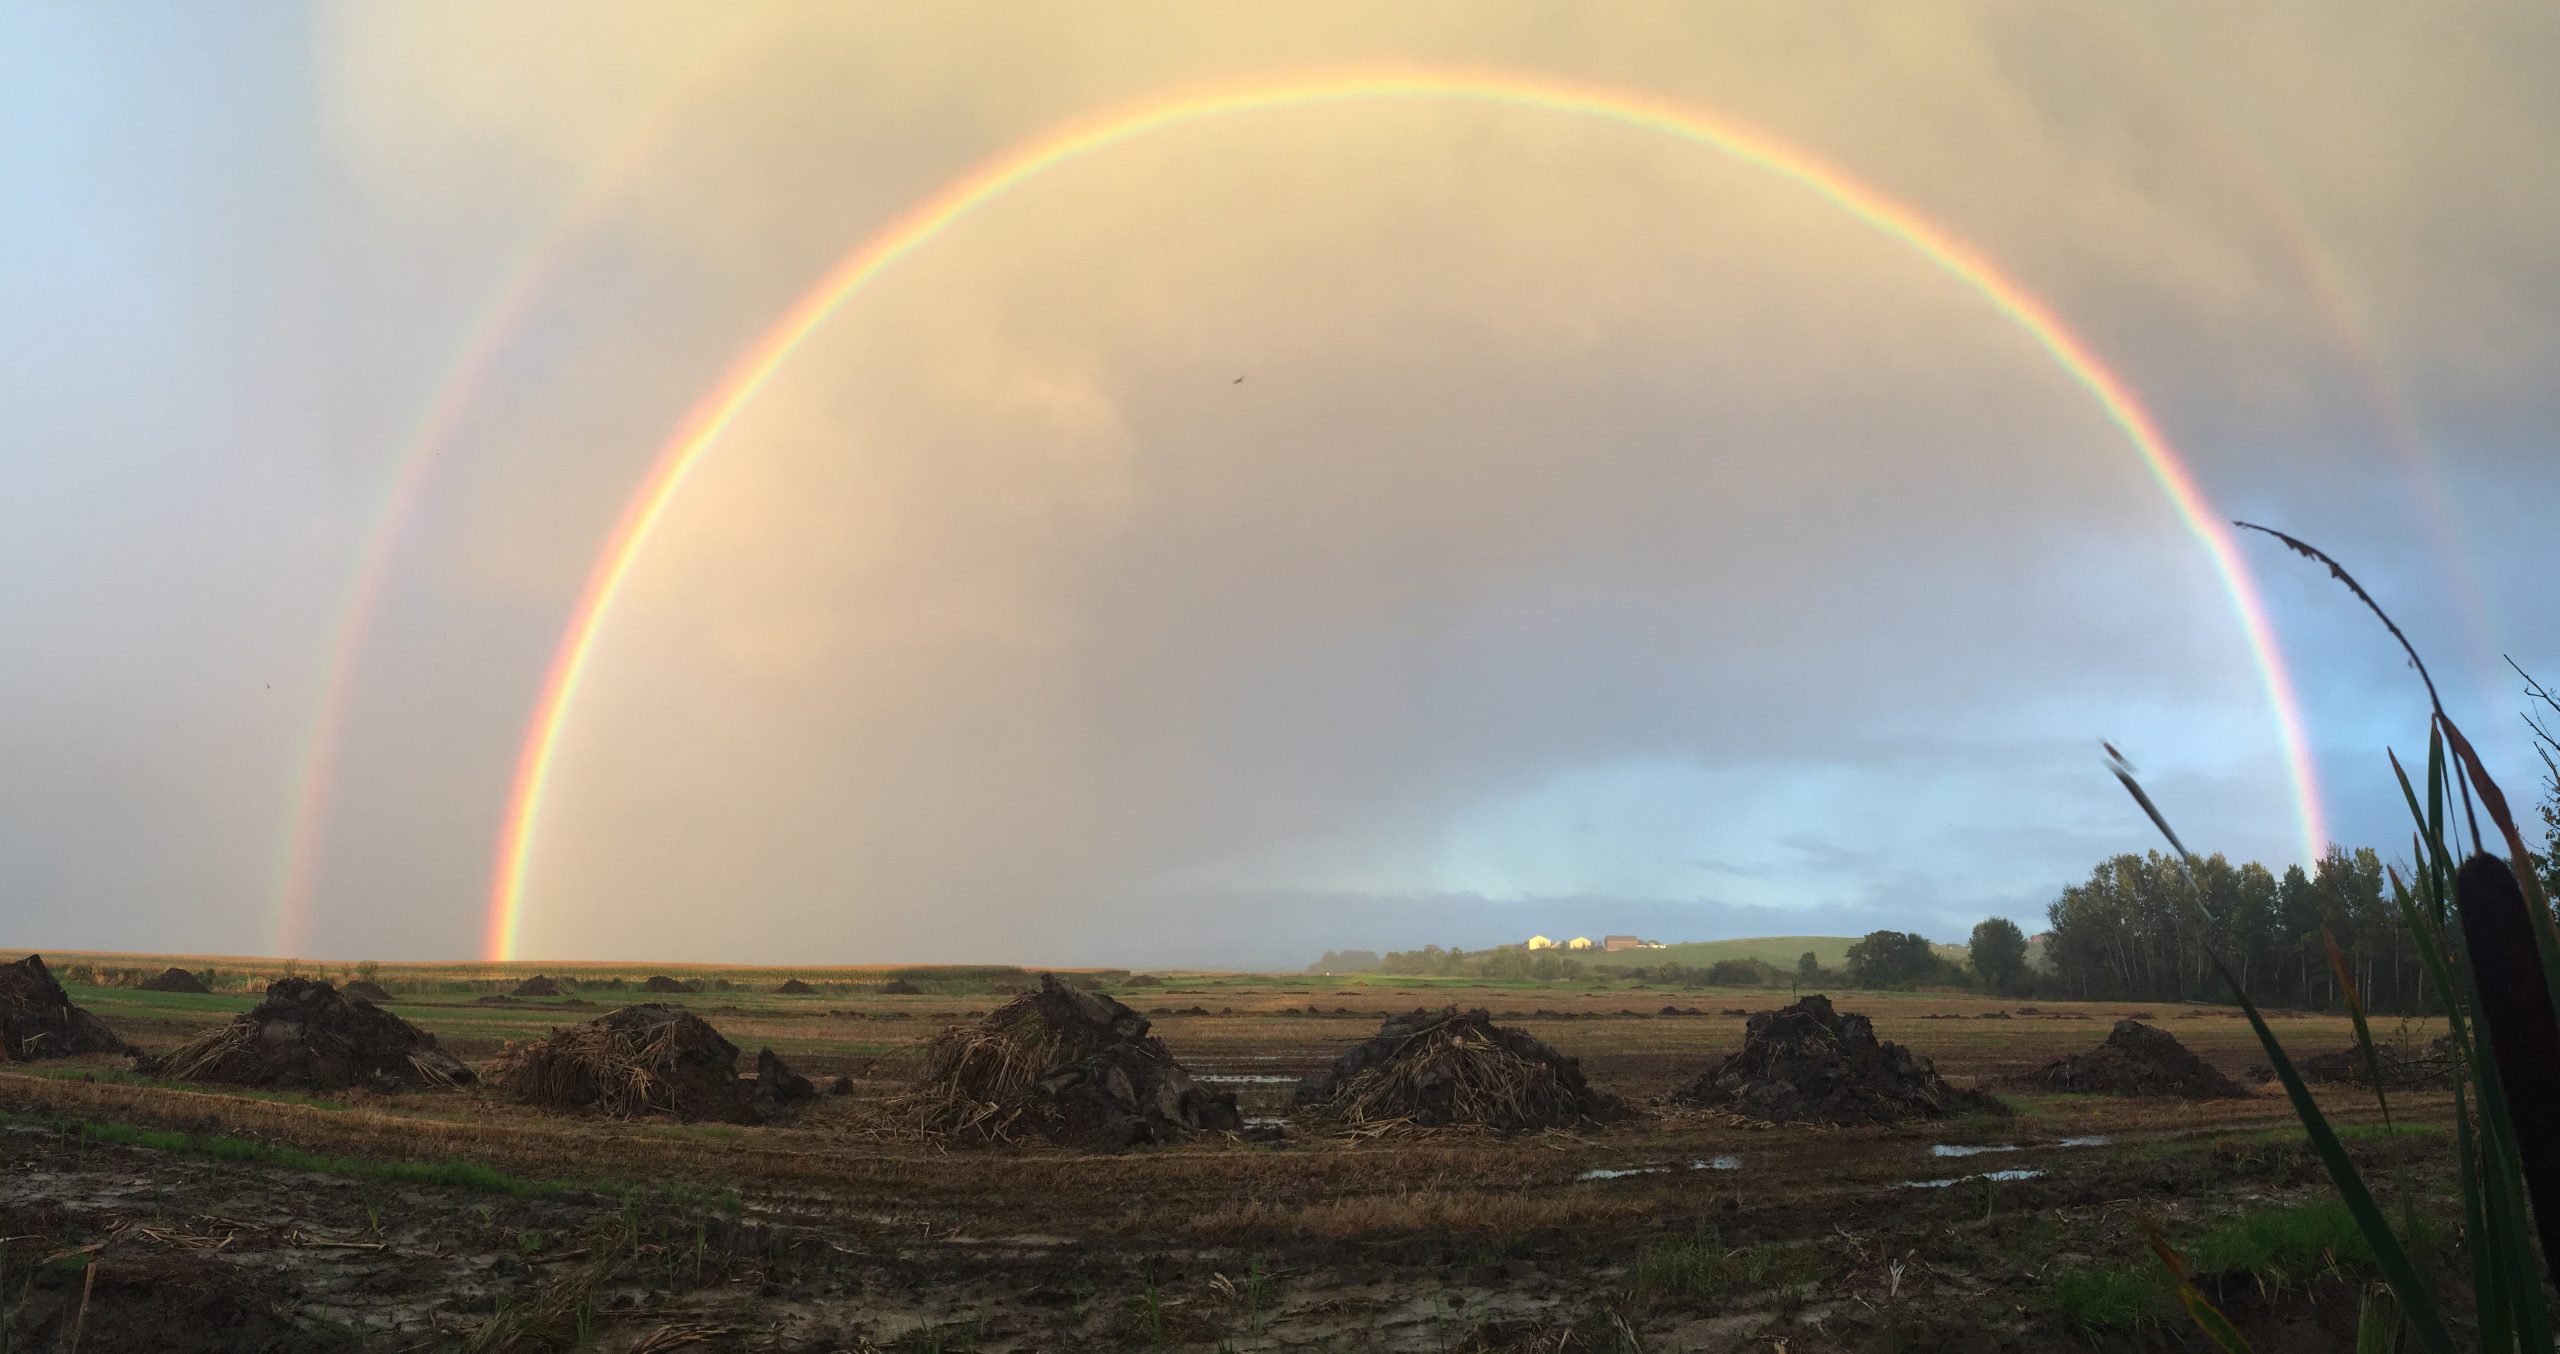 Panoramic view at Grand Pré, Nova Scotia, Canada showing a rainbow formed by sunlight falling on water droplets condensing from the Atmosphere. JWF Waldron CC-BY-SA-NC